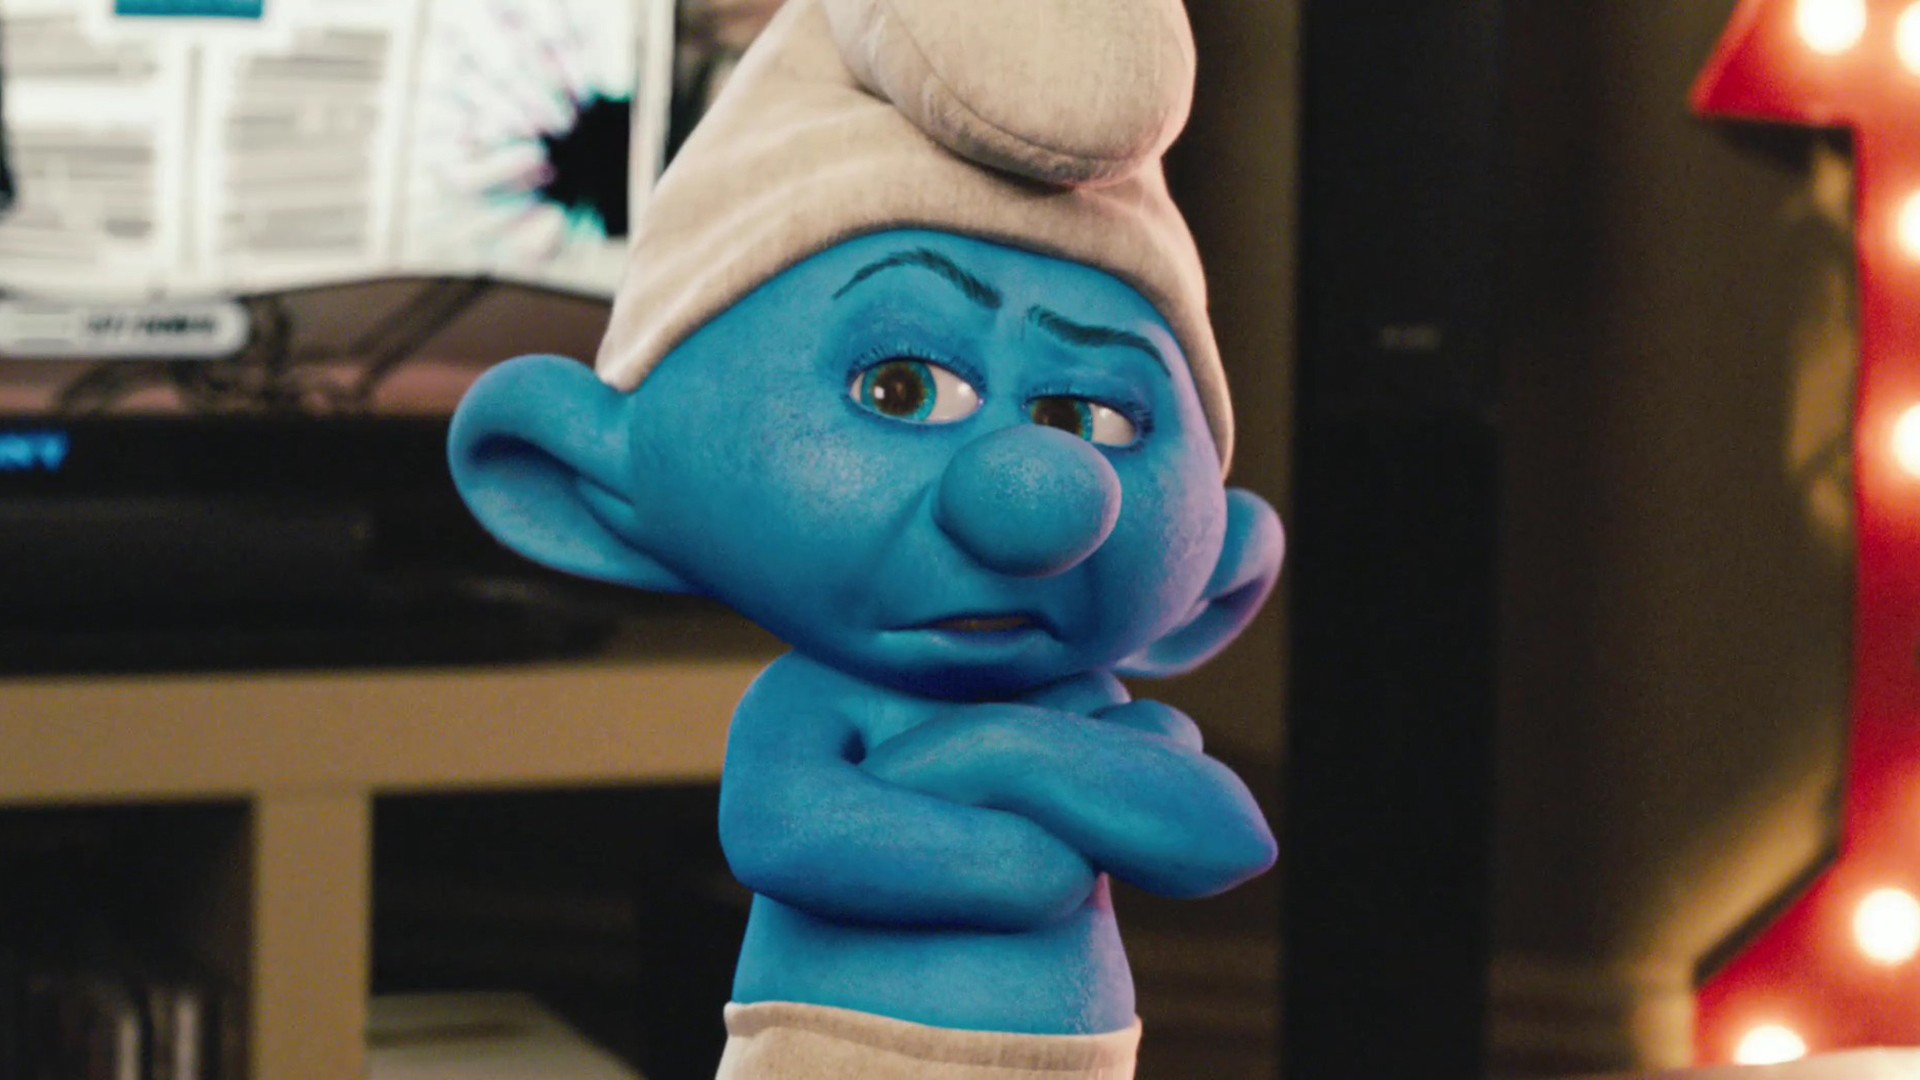 download The Smurfs